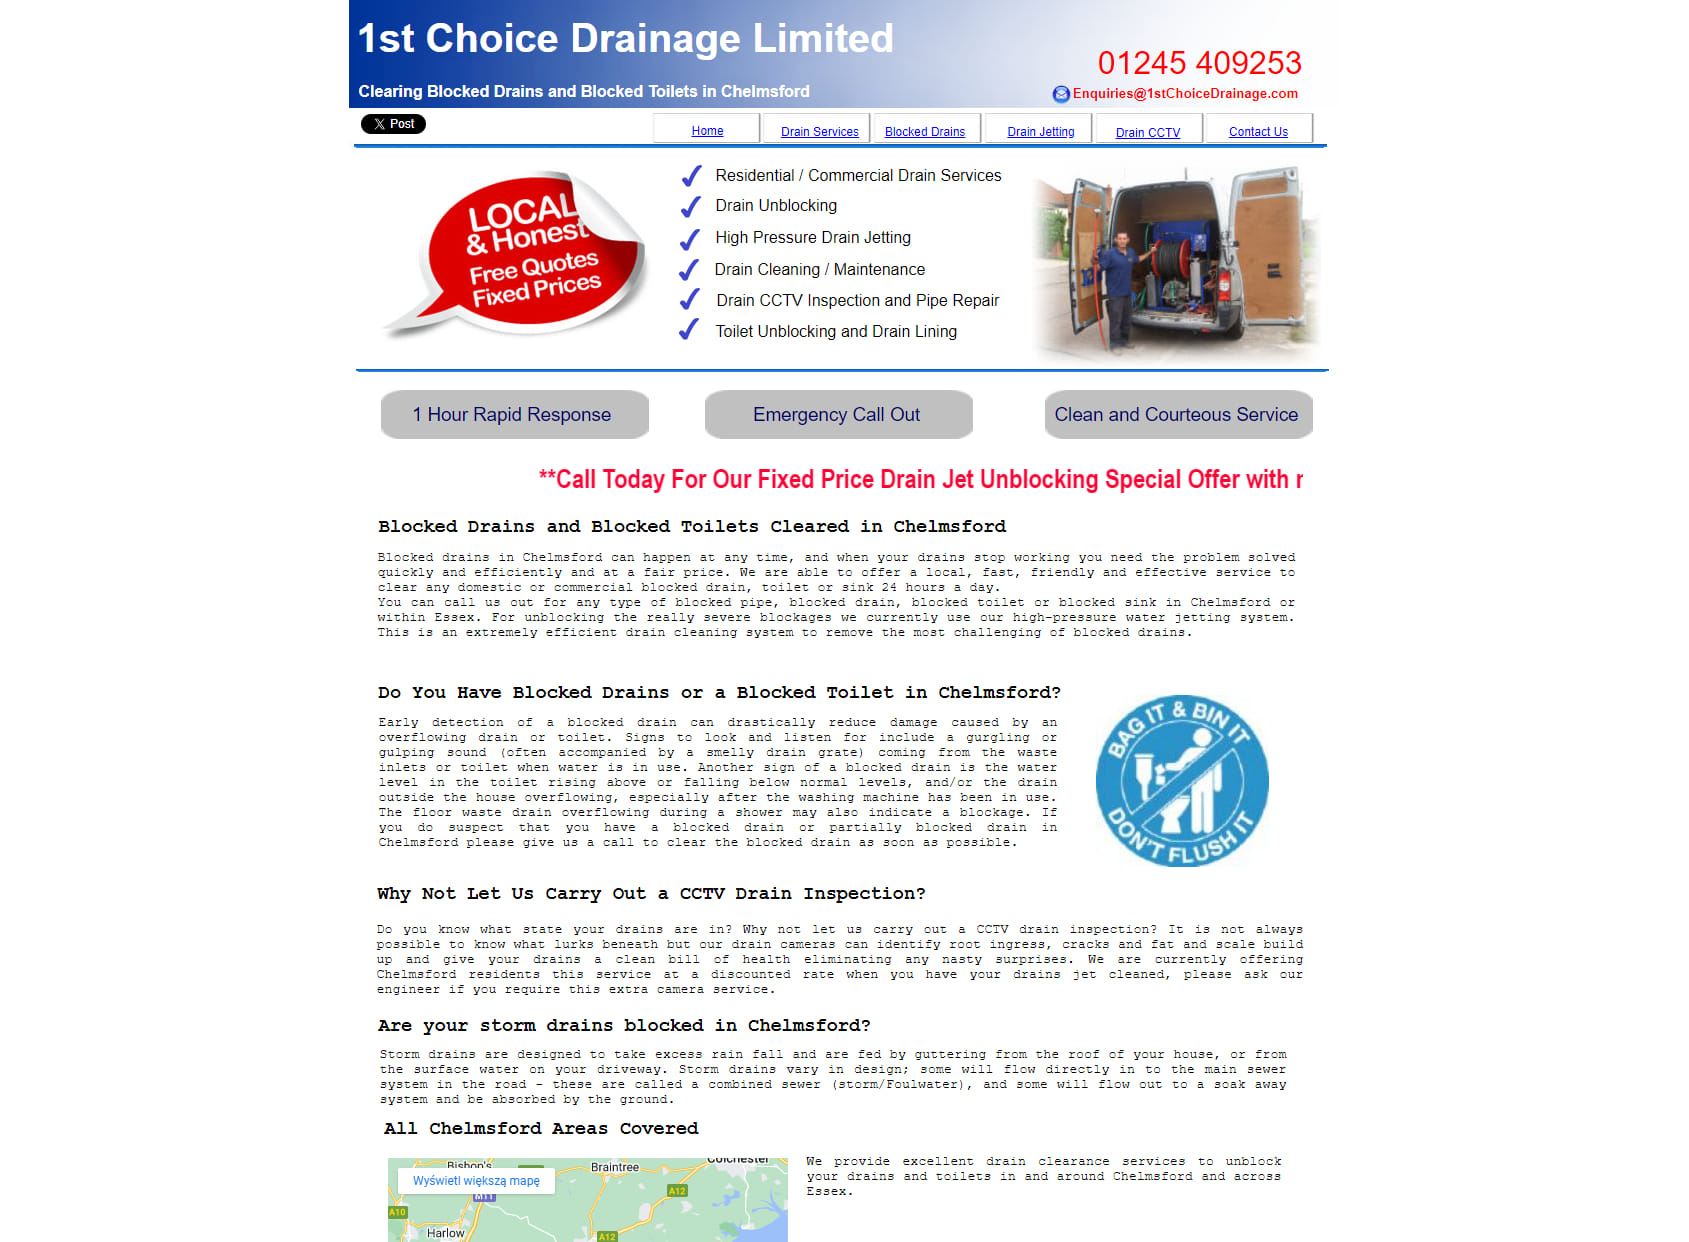 1st Choice Drainage Limited - Drain Cleaning Services